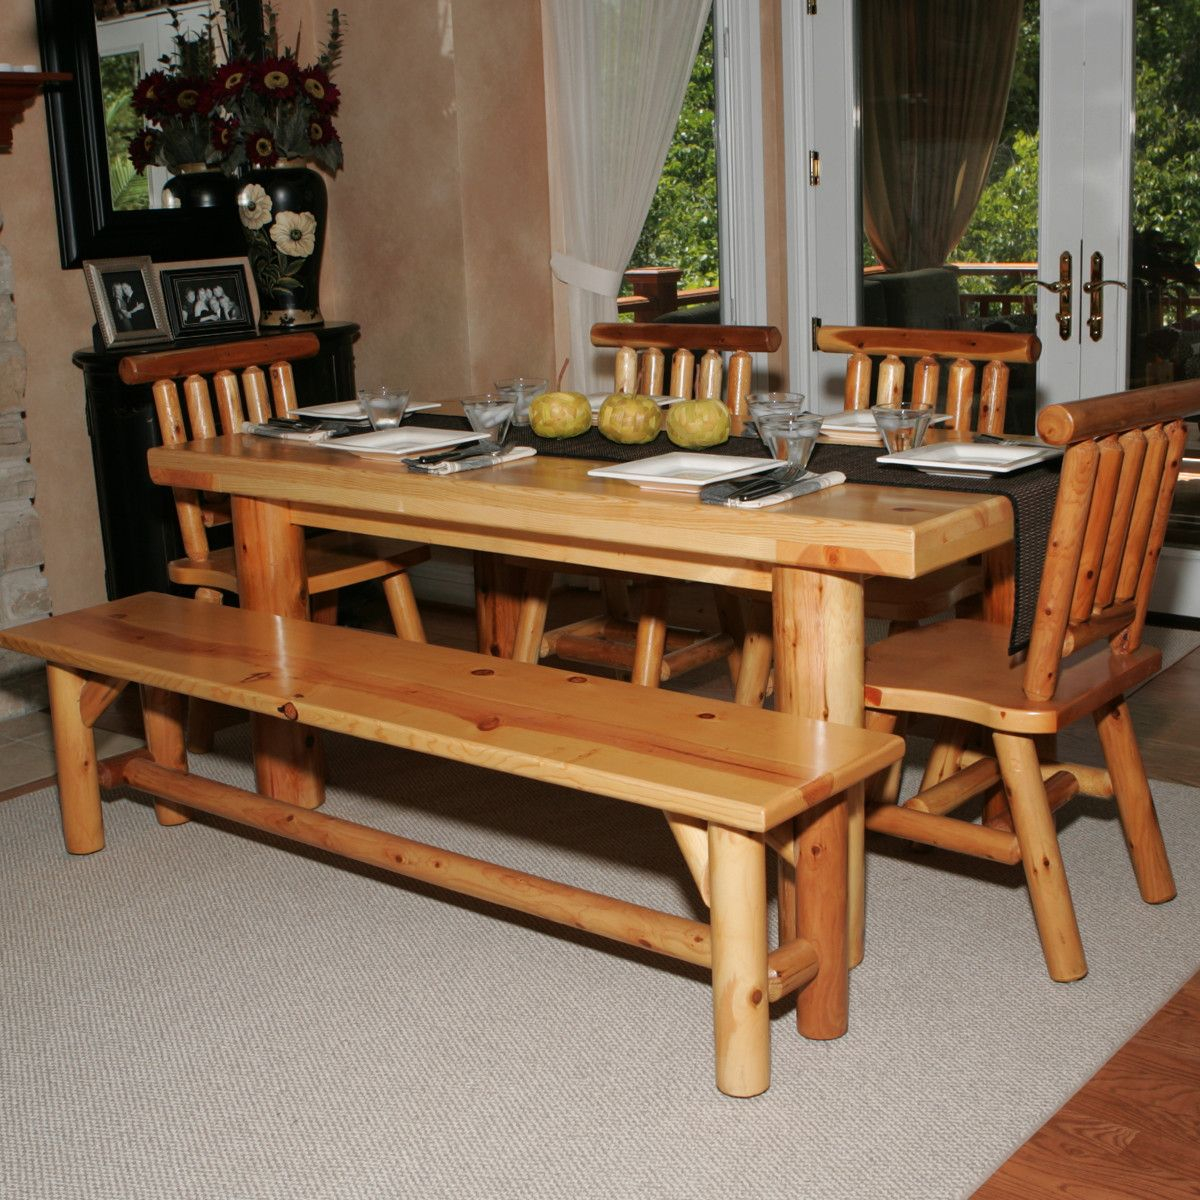 26 Dining Room Sets Big And Small With Bench Seating 2020 with sizing 1200 X 1200